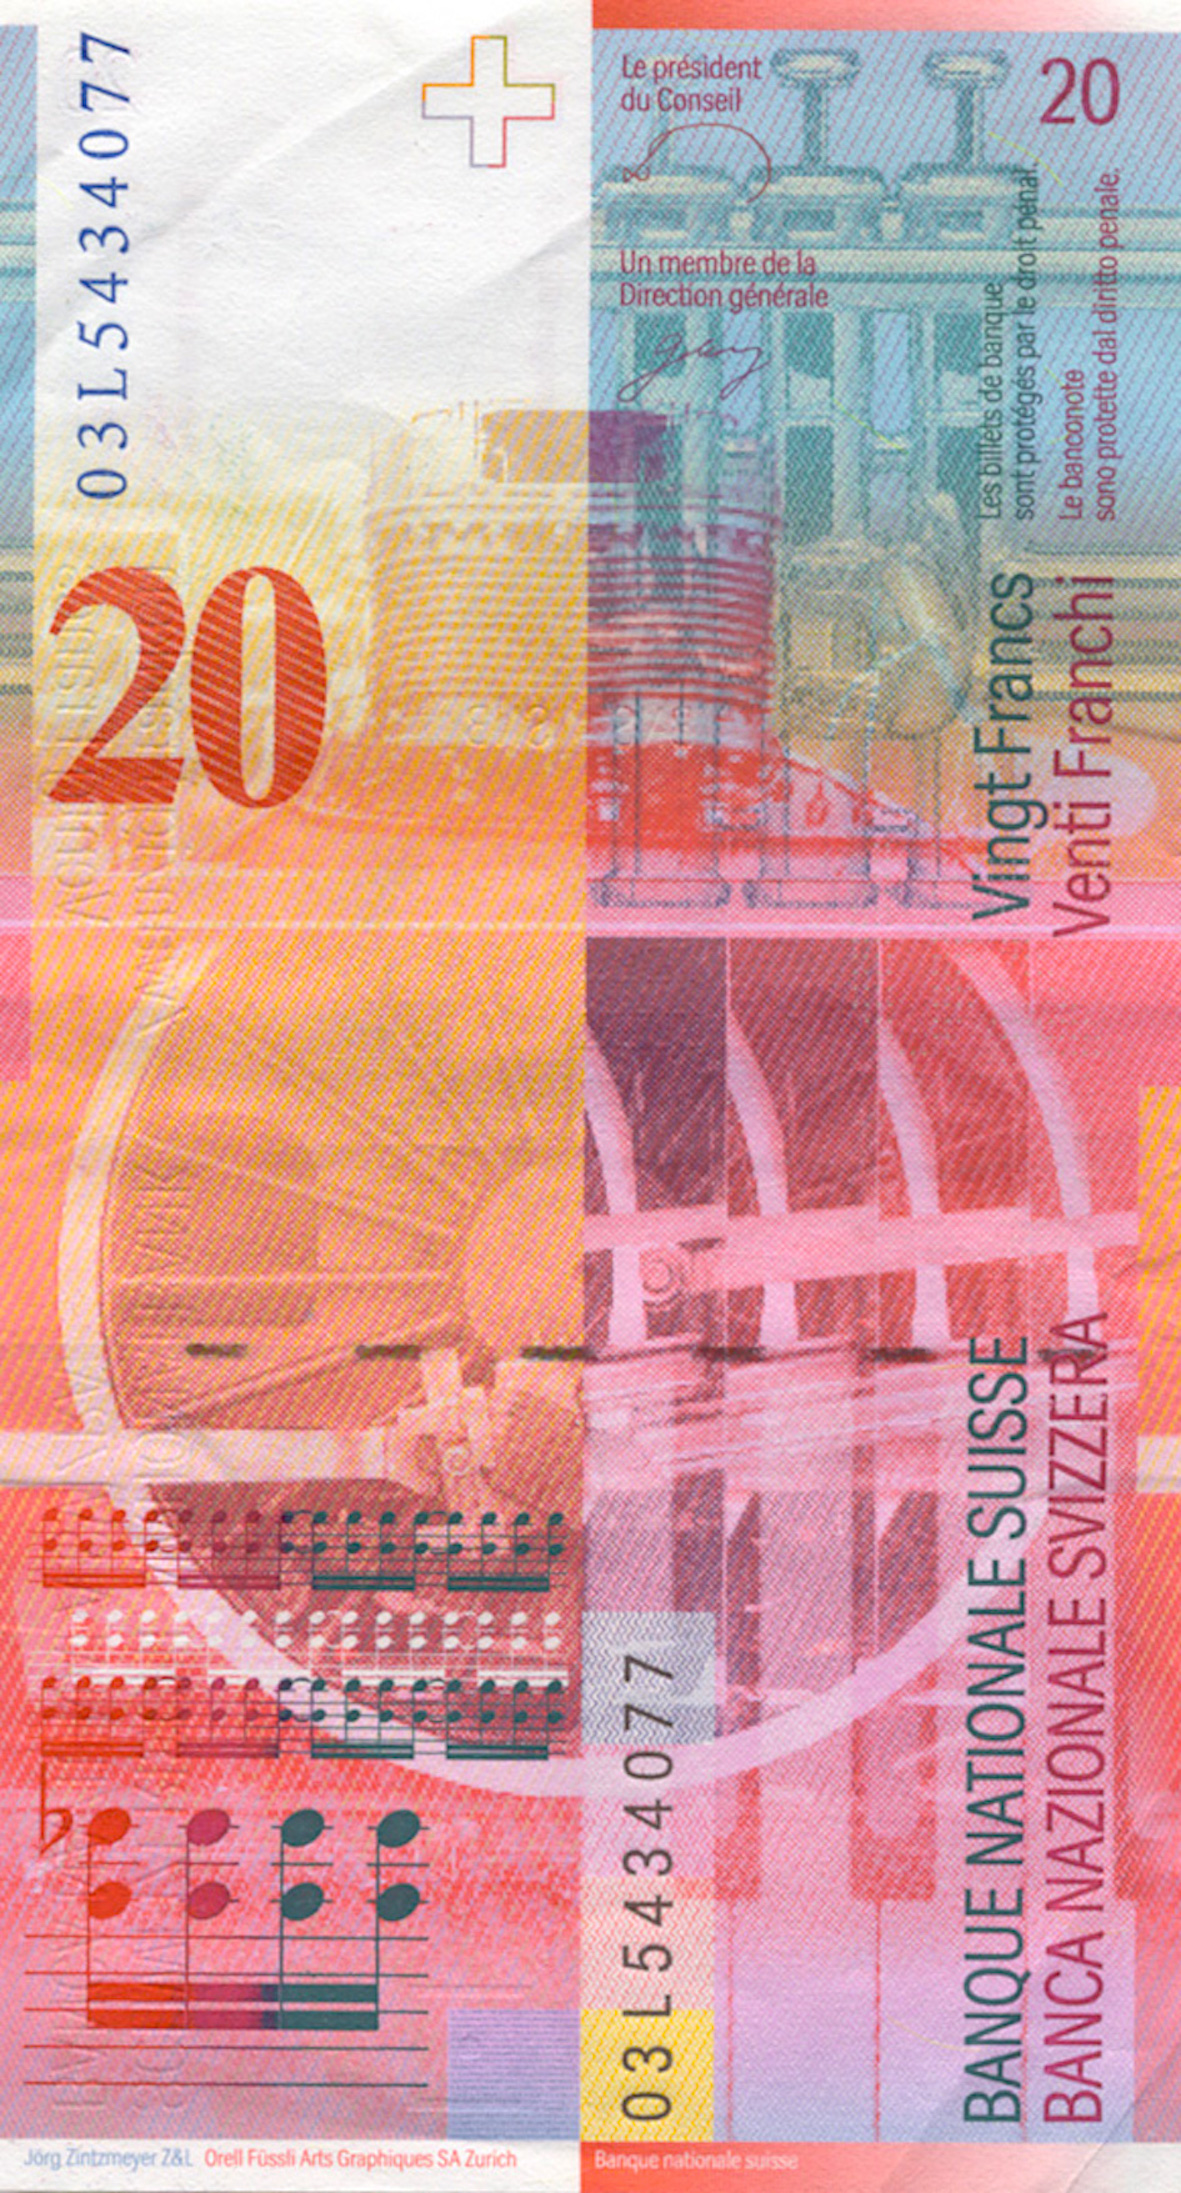 Swiss Confederation, 20 Franks 1980, 8th banknote series, in circulation since 1995 (reverse)